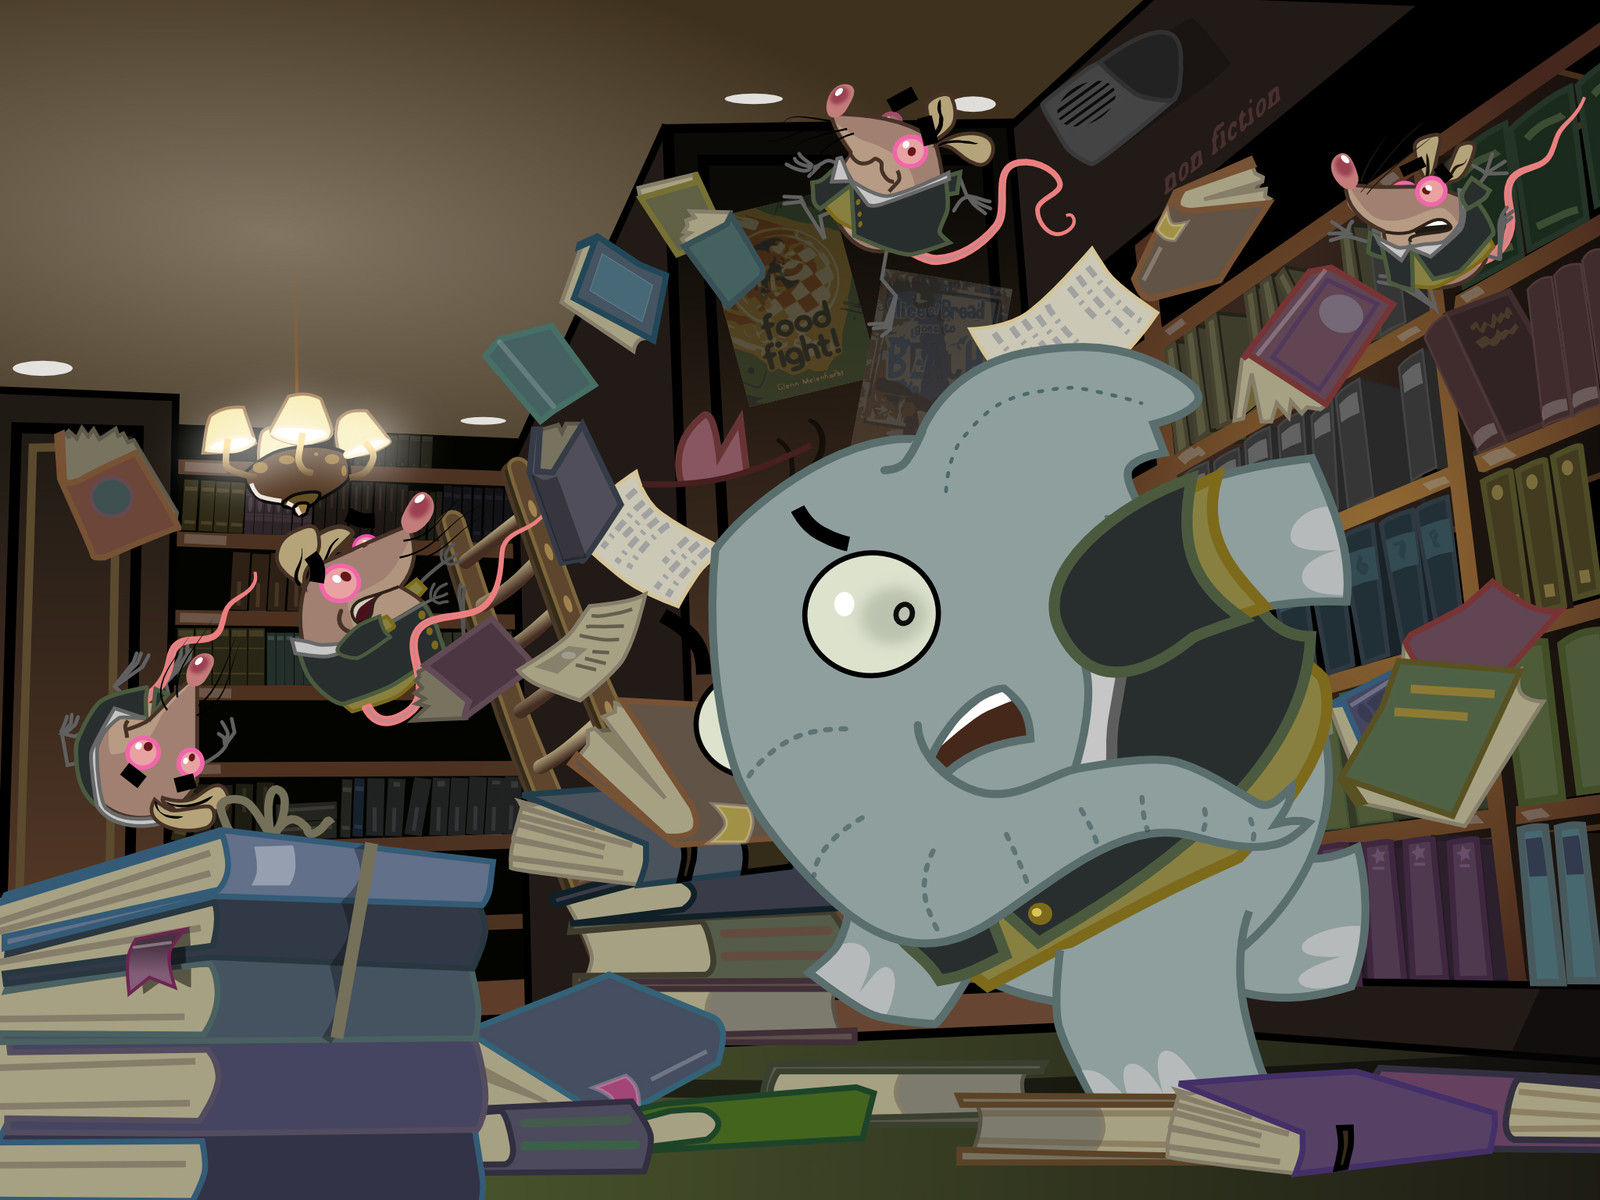 Mr. Elephant & Mr. Mouse. Library